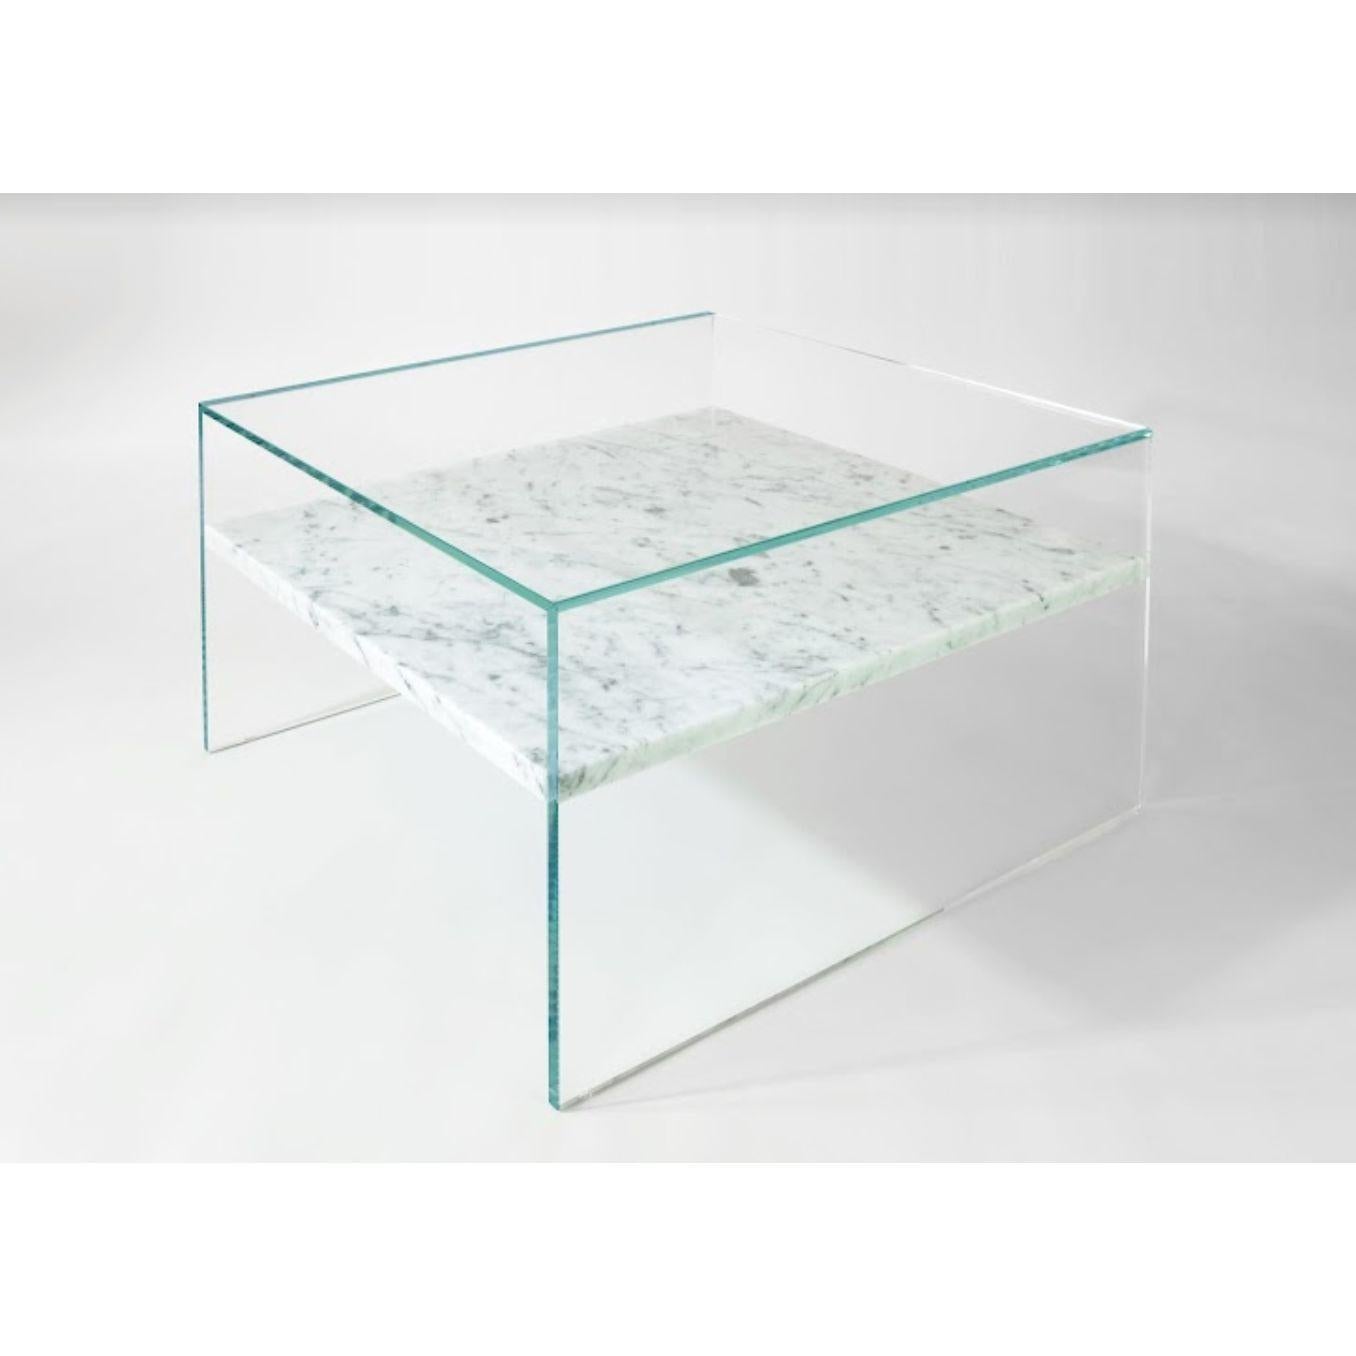 To float within end table by Claste
Dimensions: D 55.9 x W 55.9 x H 45.7 cm
Material: Marble, Glass
Weight: 66 kg

Since 2017 Quinlan Osborne has cultivated an aesthetic in his work that is rooted in the passion for contemporary design he